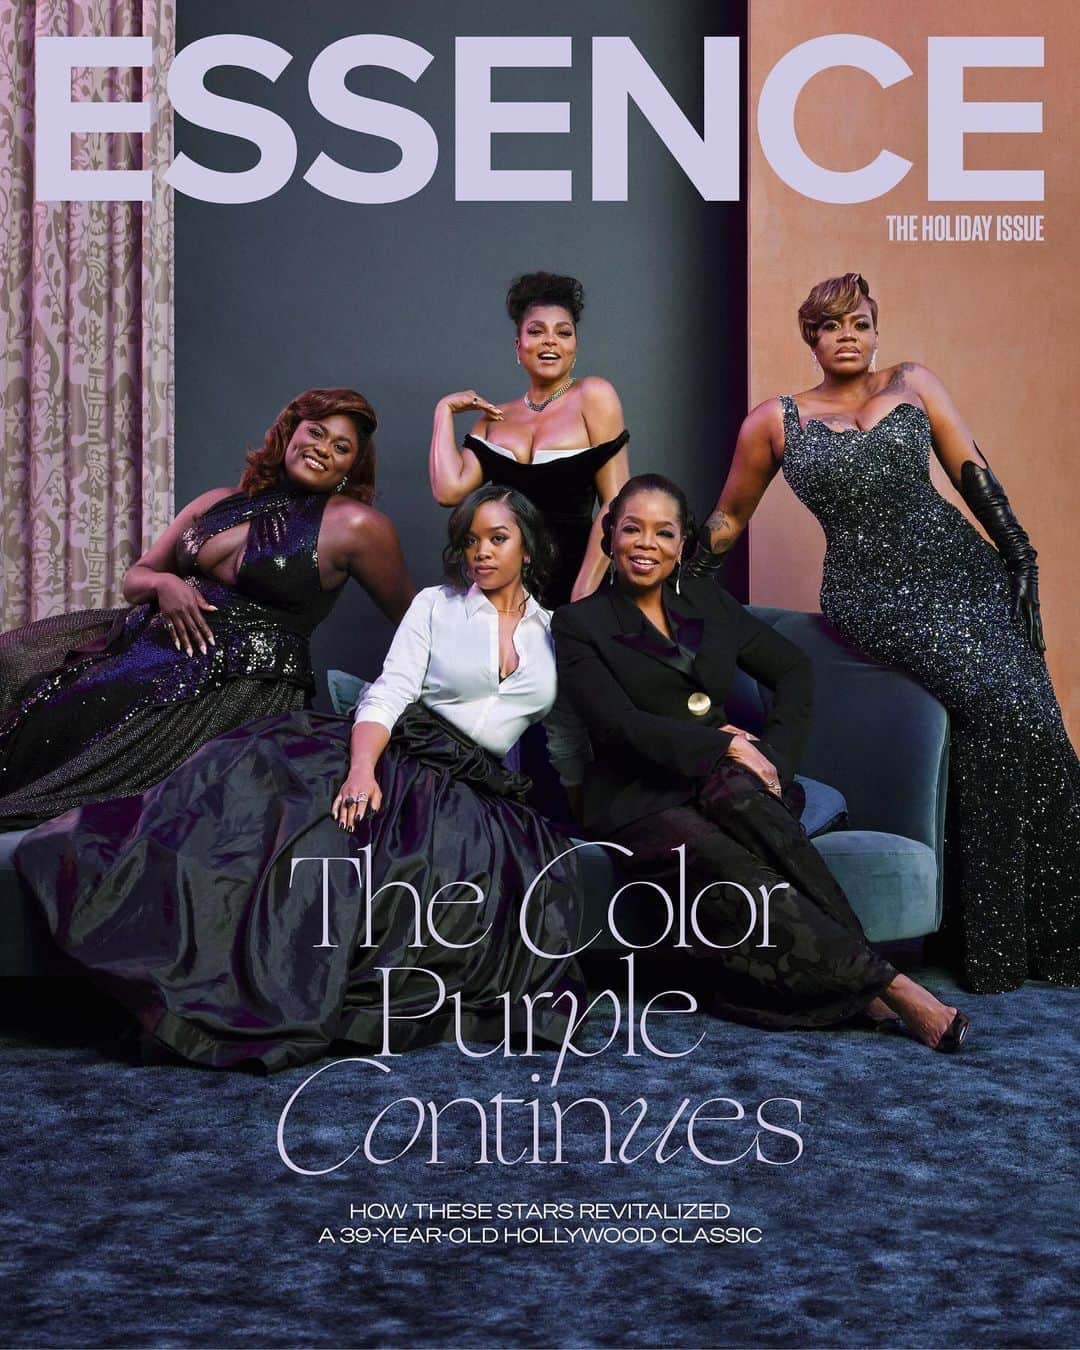 Warner Bros. Picturesのインスタグラム：「This is what it looks like when you put sisterhood, talent, and joy in one room! Oprah Winfrey, Taraji P. Henson, Fantasia, Danielle Brooks & H.E.R. take center stage as ‘The Color Purple’ cast graces the cover of our November/December issue, shot by Mickalene Thomas.  During our ESSENCE cover shoot, Oprah Winfrey led a discussion about the experience they shared of making the movie. She asked, "what would you say to the women who played your characters in the original 1985 cast of The Color Purple?"  Fantasia: "I would say thank you, Ms. Whoopi Goldberg, for not being afraid to play Celie. For being honest. Thank you for paving the way for girls like myself."  Taraji: "I would say to Margaret Avery: You taught me how to be sexy and how to see myself as a fully realized sexy woman."  H.E.R.: "Ms. Rae Dawn Chong, thank you for giving me an opportunity to show myself. A lot of people know me and my music, but they don’t really know me. They’re getting to see me: Who I am, having fun and feeling empowered."  Danielle: "I just want to thank you, Ms. Oprah, for surrendering to God and his plan for your life. You have shown me how to do that. Thank you for laying the blueprint for Sofia—because I know that she’s changed your life, and I can feel that mine is about to shift, too. Thank you for leaving space for me but also being there, to hold my hand and answer that phone call when I needed you. You have been such a light, such a beautiful soul."  It is awe-inspiring to witness this constellation of stars reflect on their work with such humility and grace. As the women affirm one another, it is clear they have built fortifying -relationships, on set and off.  There’s just something about The Color Purple 💜 Read the full story on #ESSENCE  Disclaimer: We recognize Black creatives are still fighting for their respect and equity; this fight has been displayed through this year’s labor strikes. It is important for us to let our readers know that ESSENCE conducted these interviews and photo shoot for our cover story in May 2023.  Photographer: @mickalenethomas  Writer: @felicexleon」